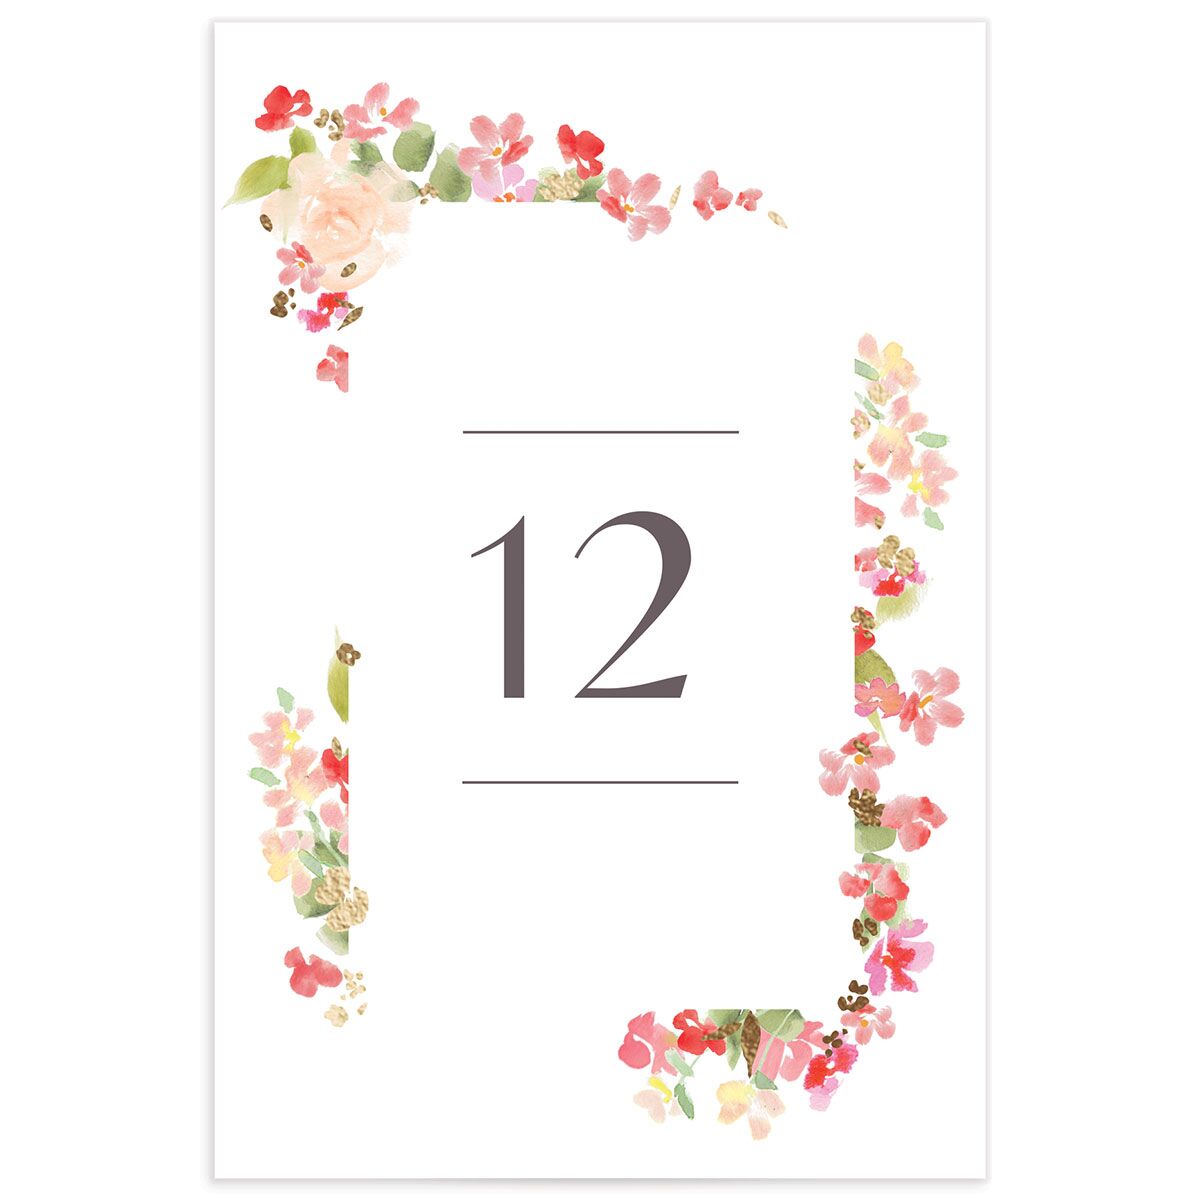 Scattered Blossoms Table Numbers